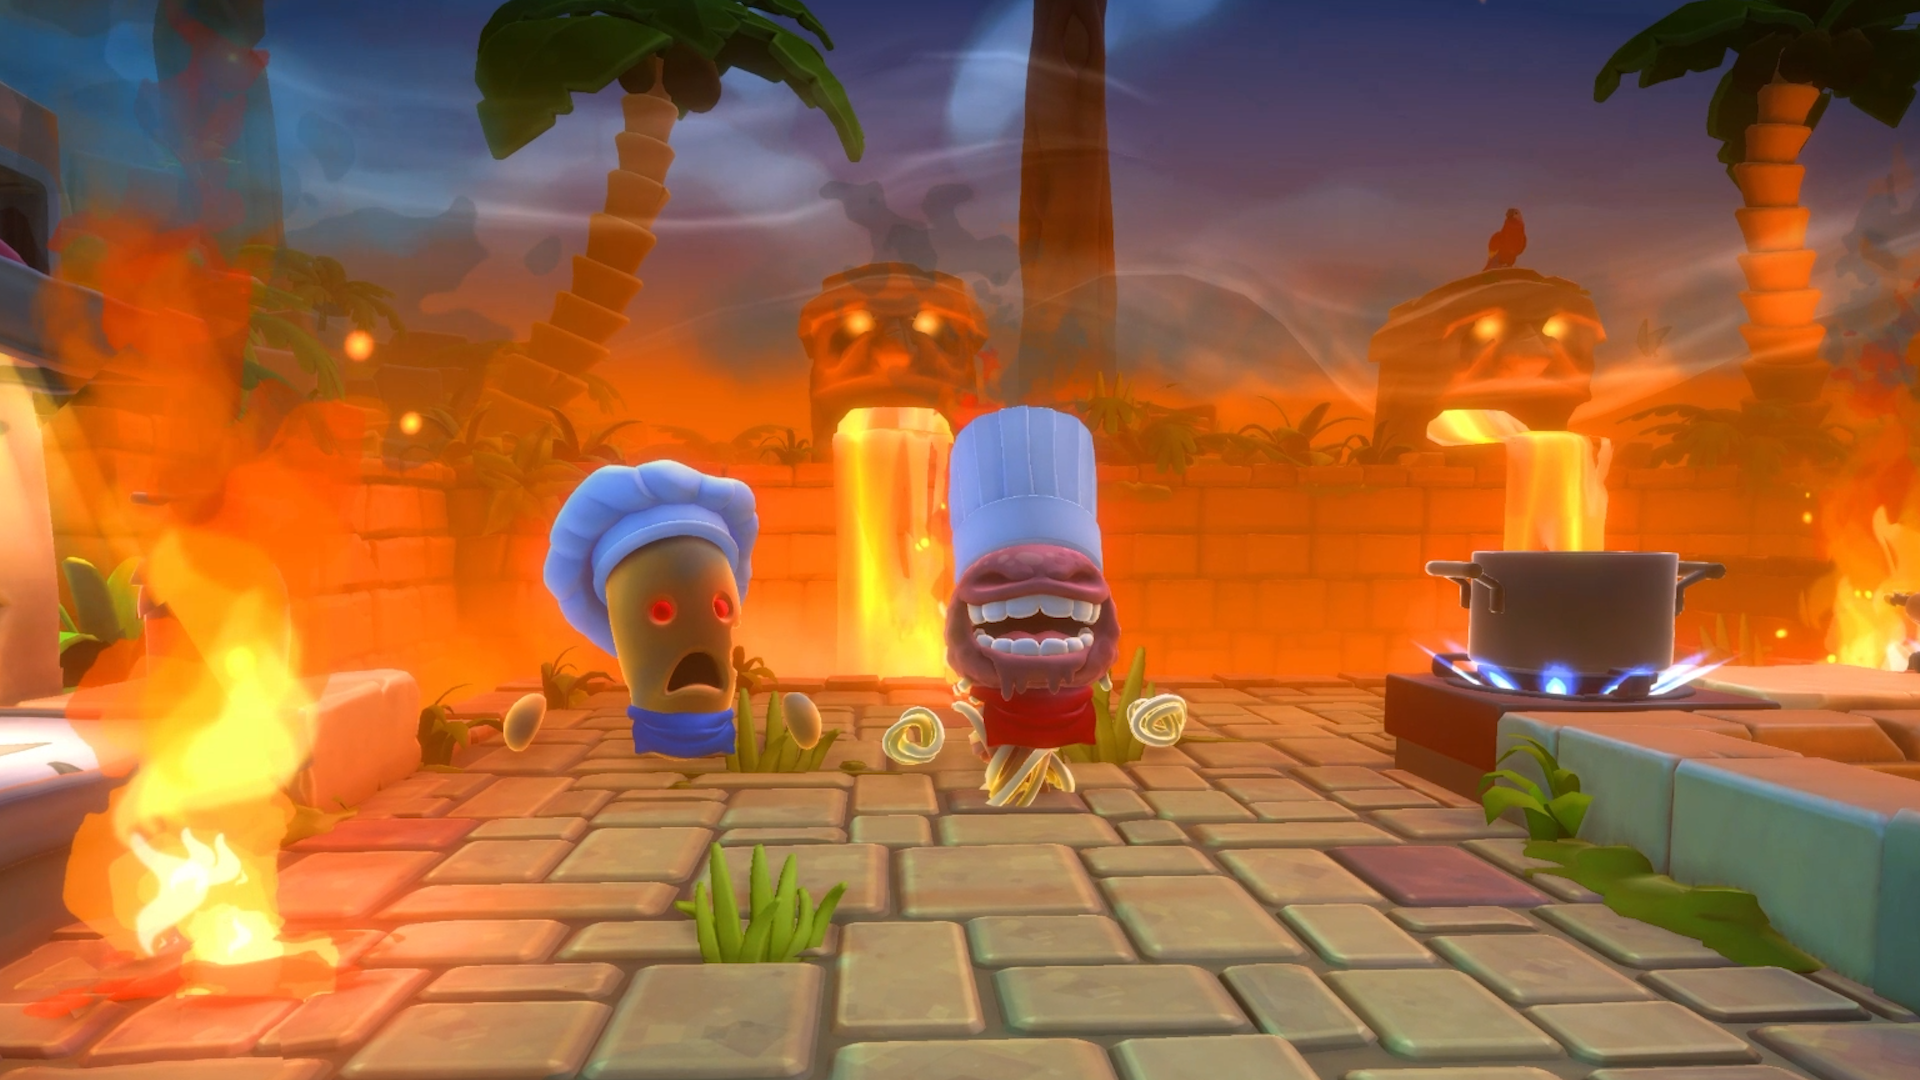 Overcooked All You Can Eat Release Date Set For PS5 Launch With